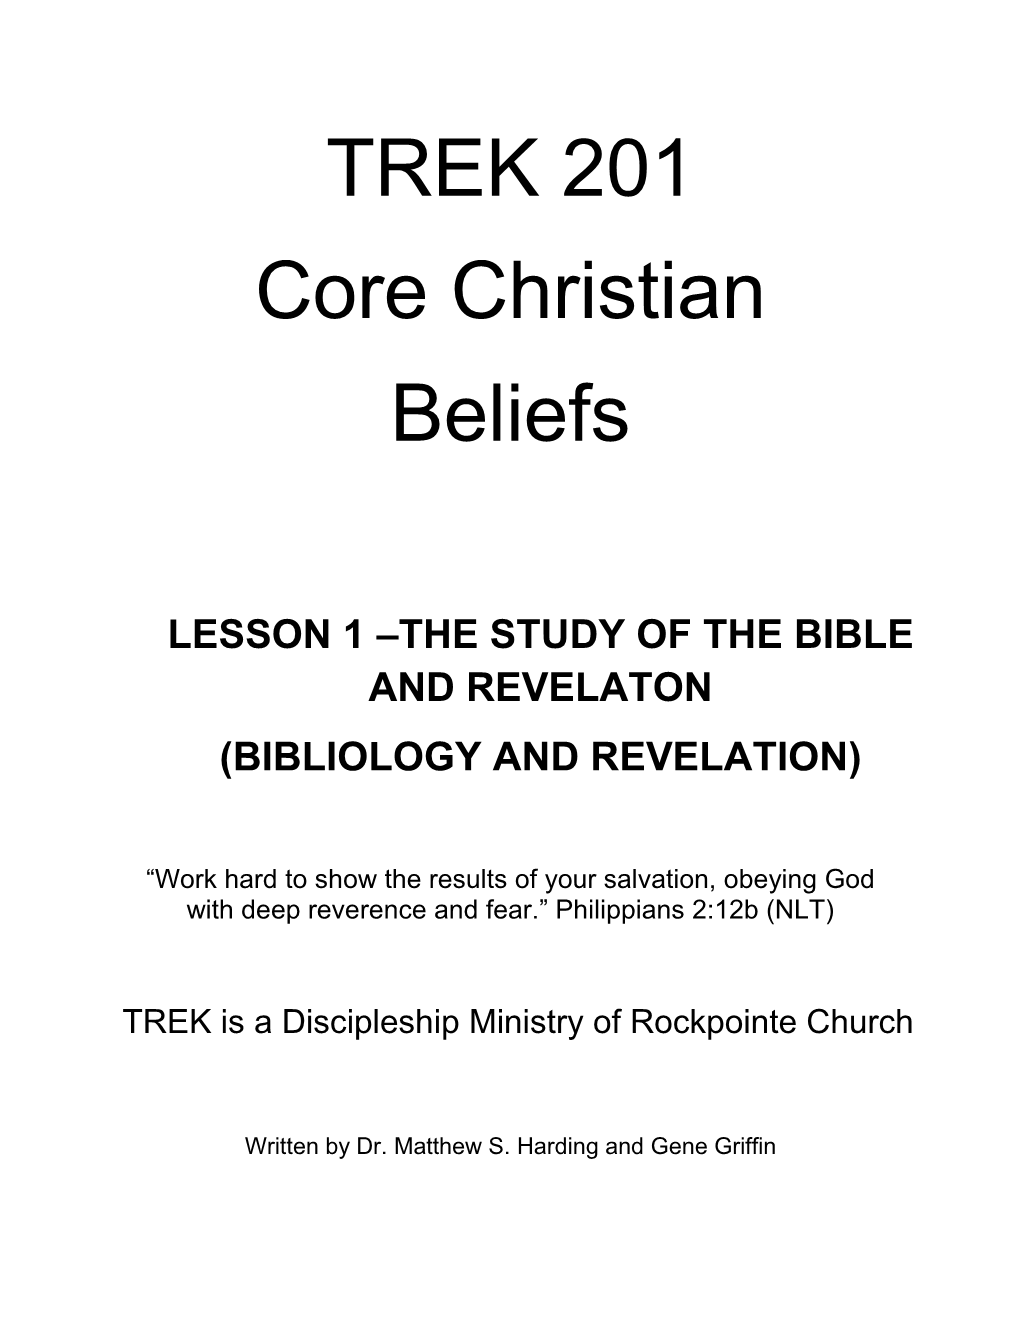 Lesson 1: the Study of the Bible and Revelation